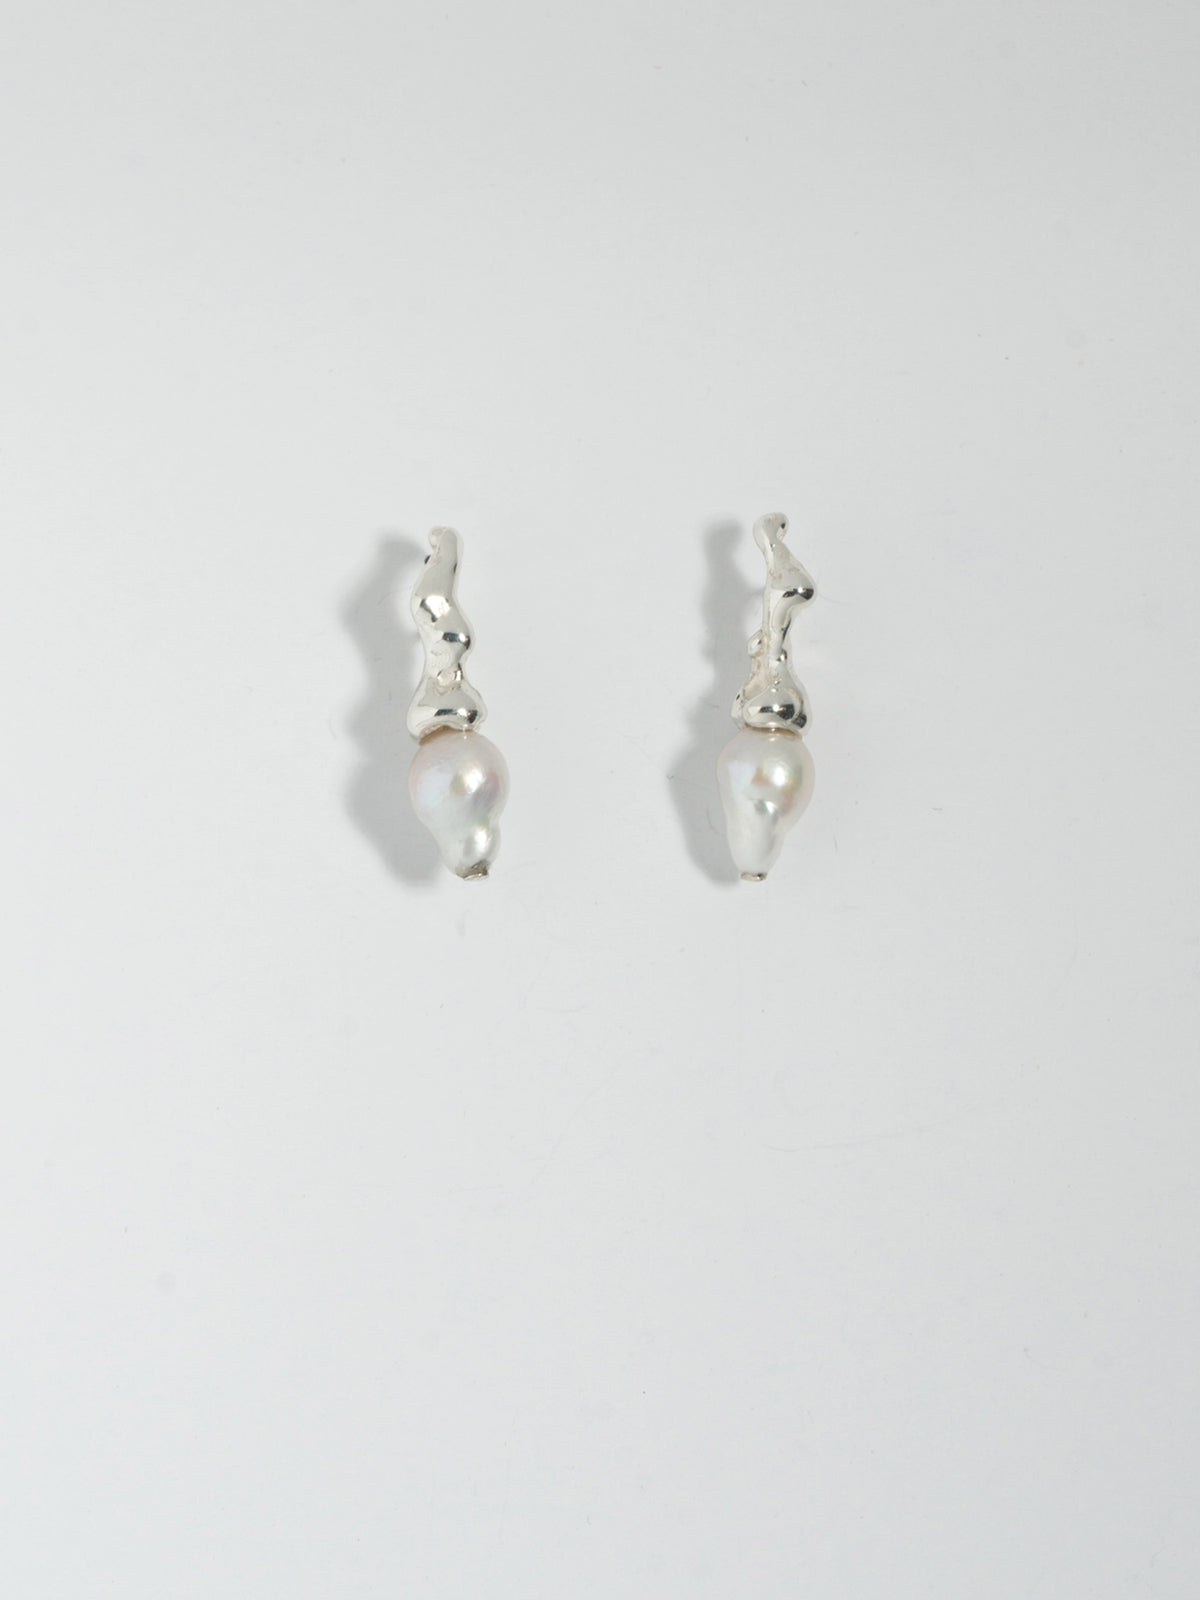 Product image of FARIS SPRIG PERLA Earrings in sterling silver. Laid side by side, front view